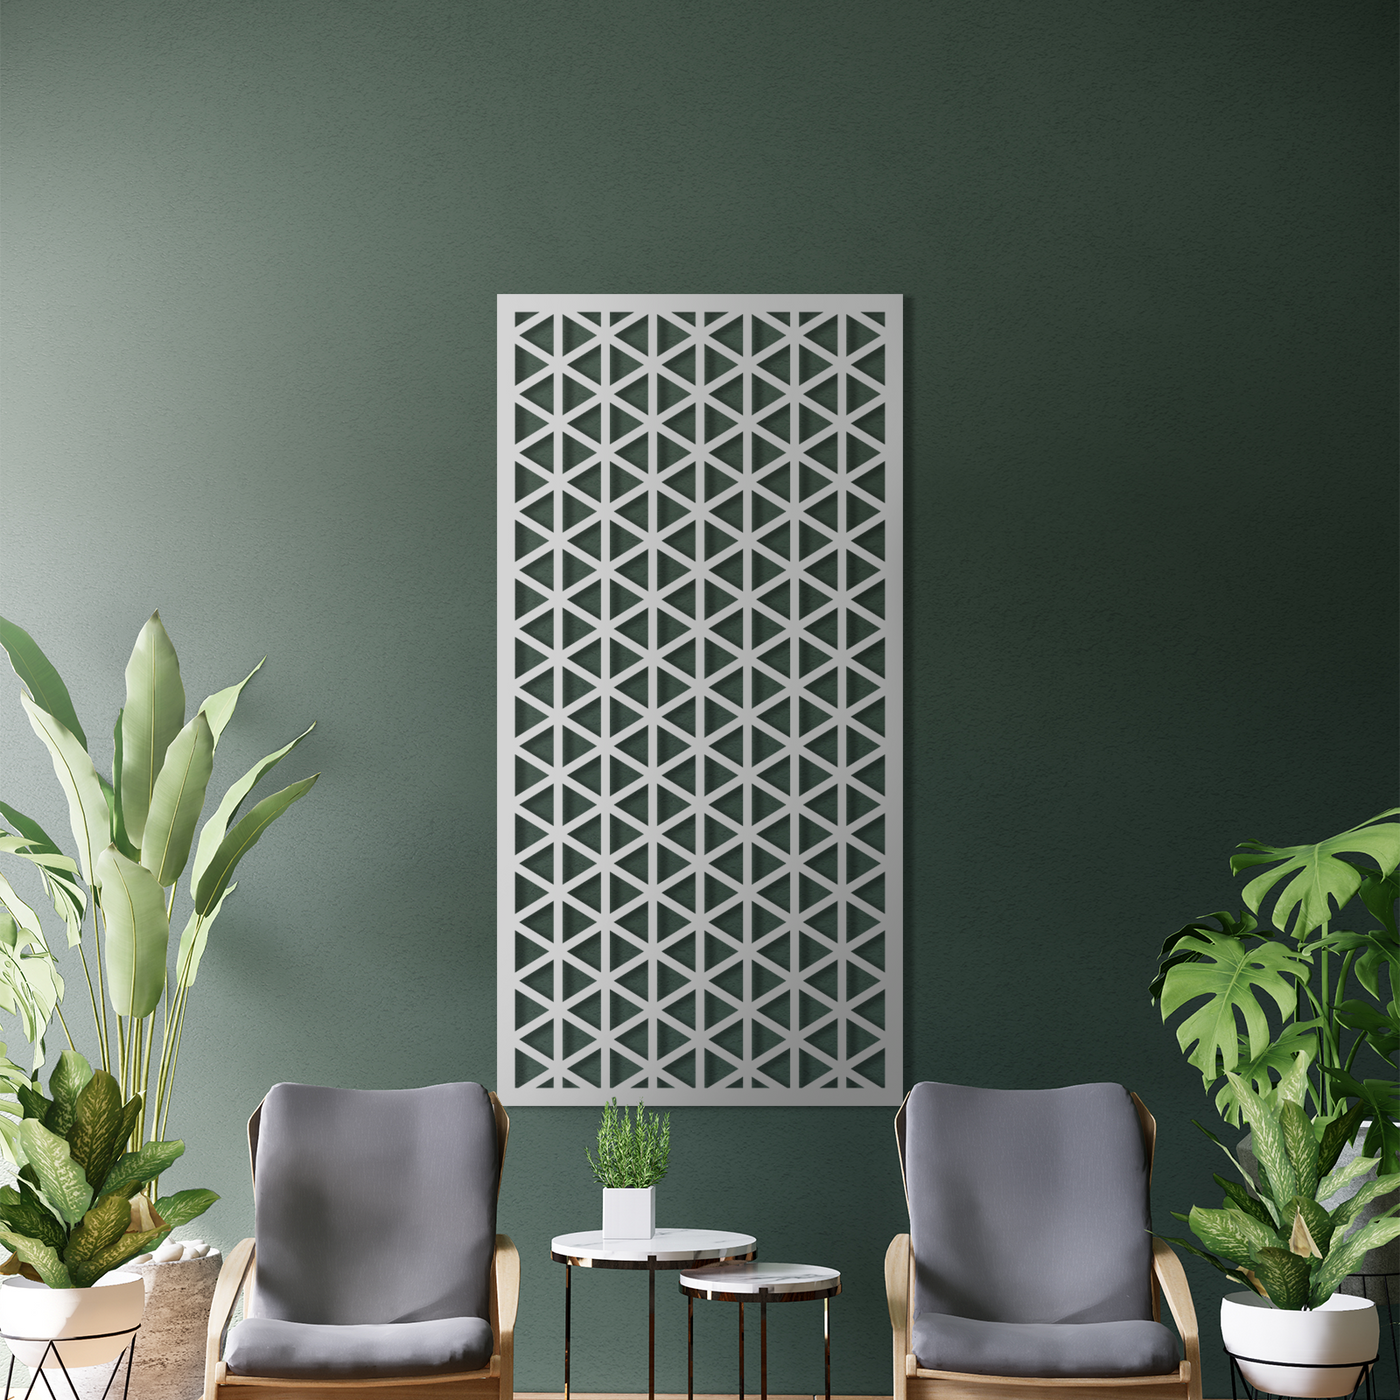 Tessellate Metal Screen: The Perfect Way to Keep Your Garden Private and Stylish